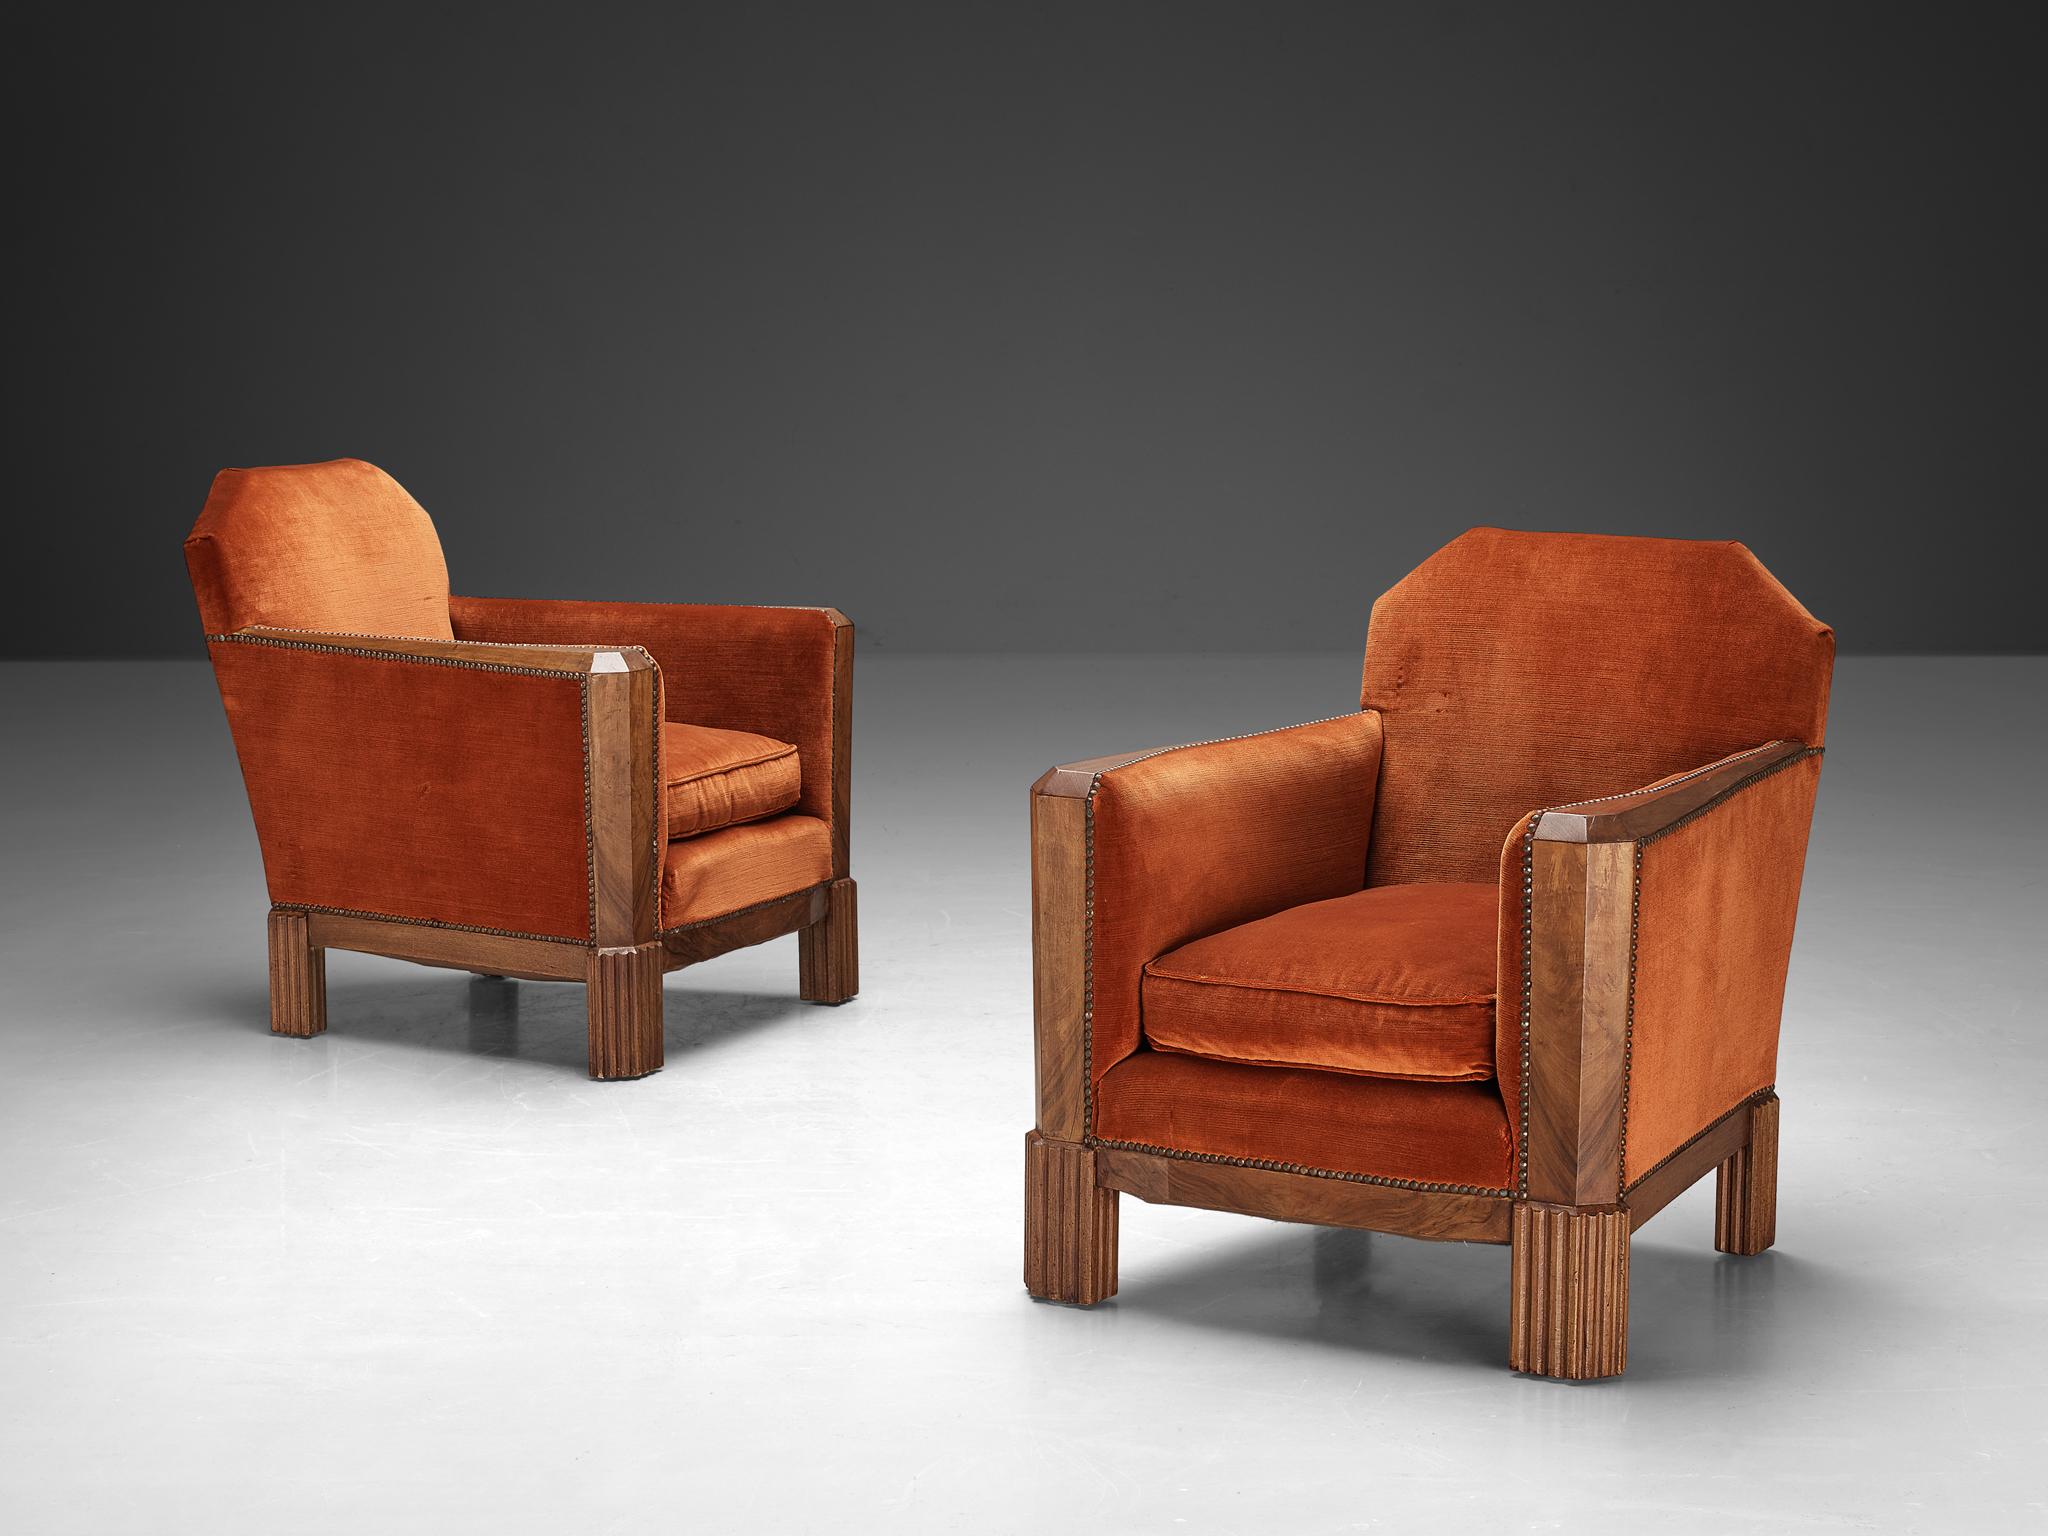 Pair of armchairs, corduroy, walnut, beech, metal, France, 1930s

These elegantly crafted lounge chairs hail from one of the most significant periods in art history, the Art Deco Movement. Originating in France during the 1930s, these chairs are